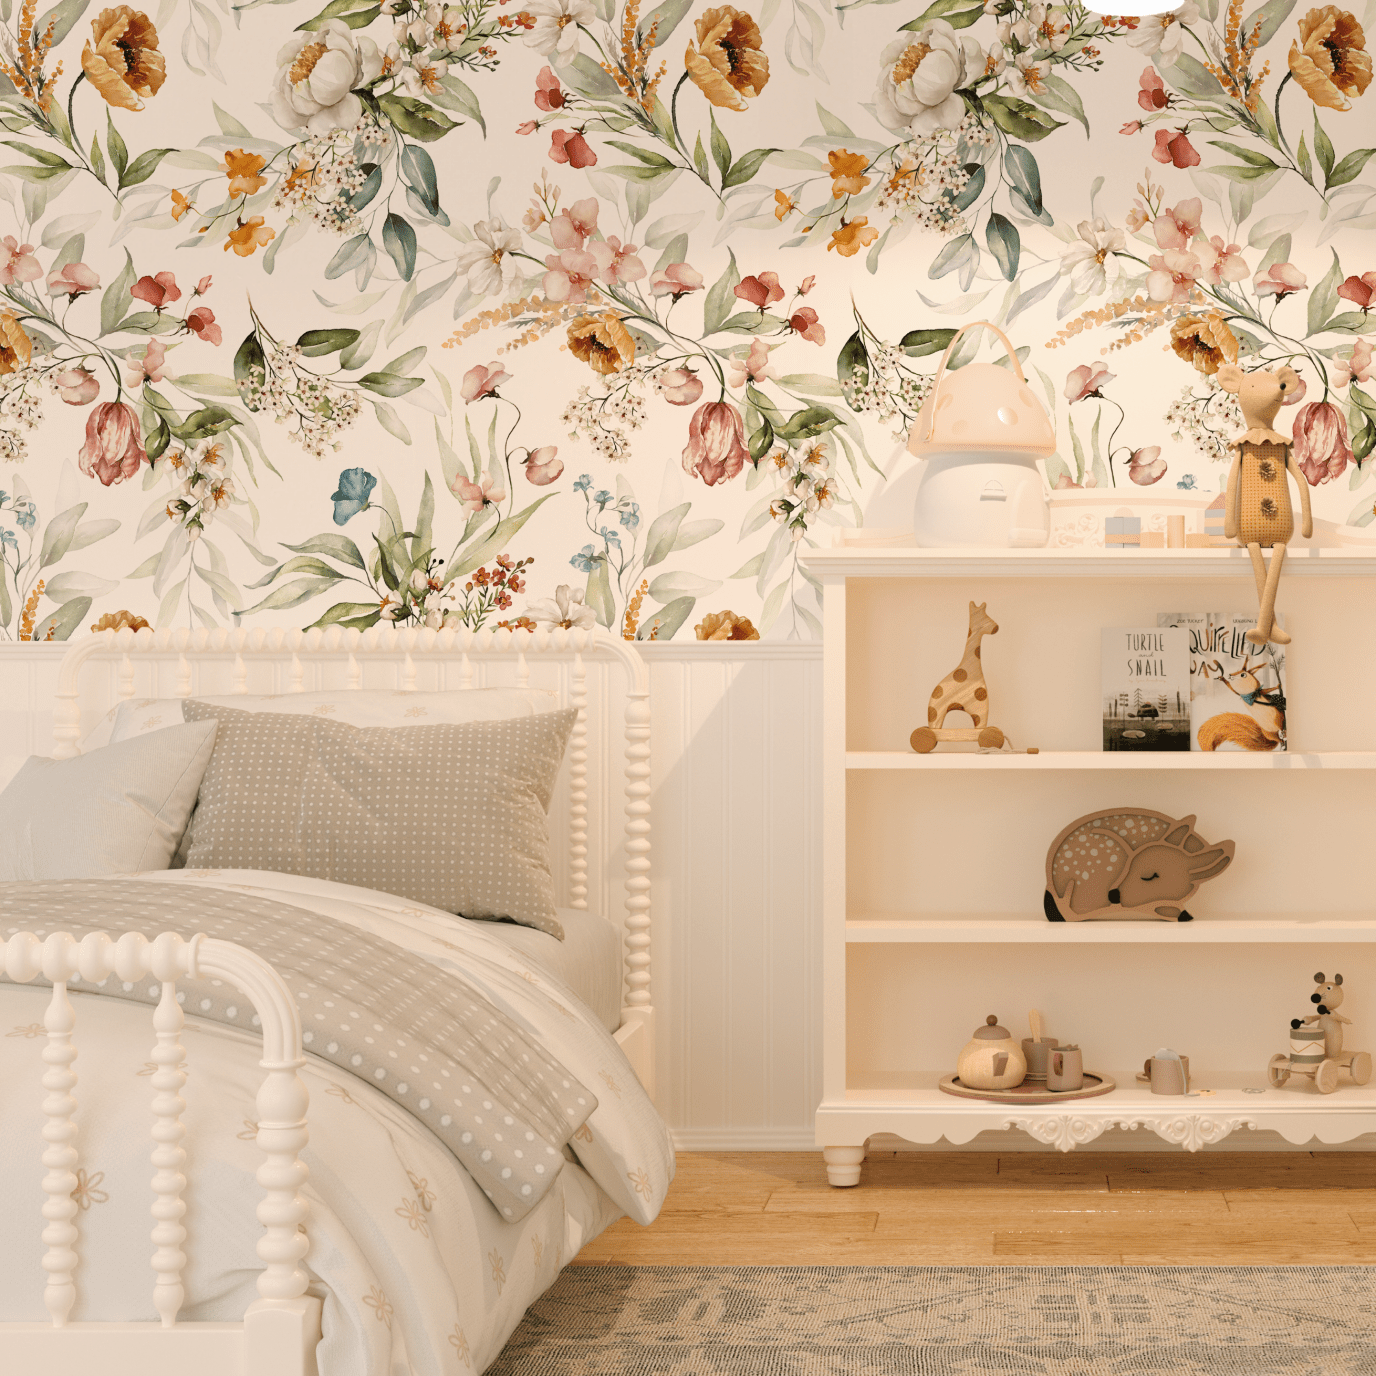 A cozy bedroom corner highlighting wallpaper with a rich array of flowers and leaves in soft watercolor tones of peach, mustard, and sage.